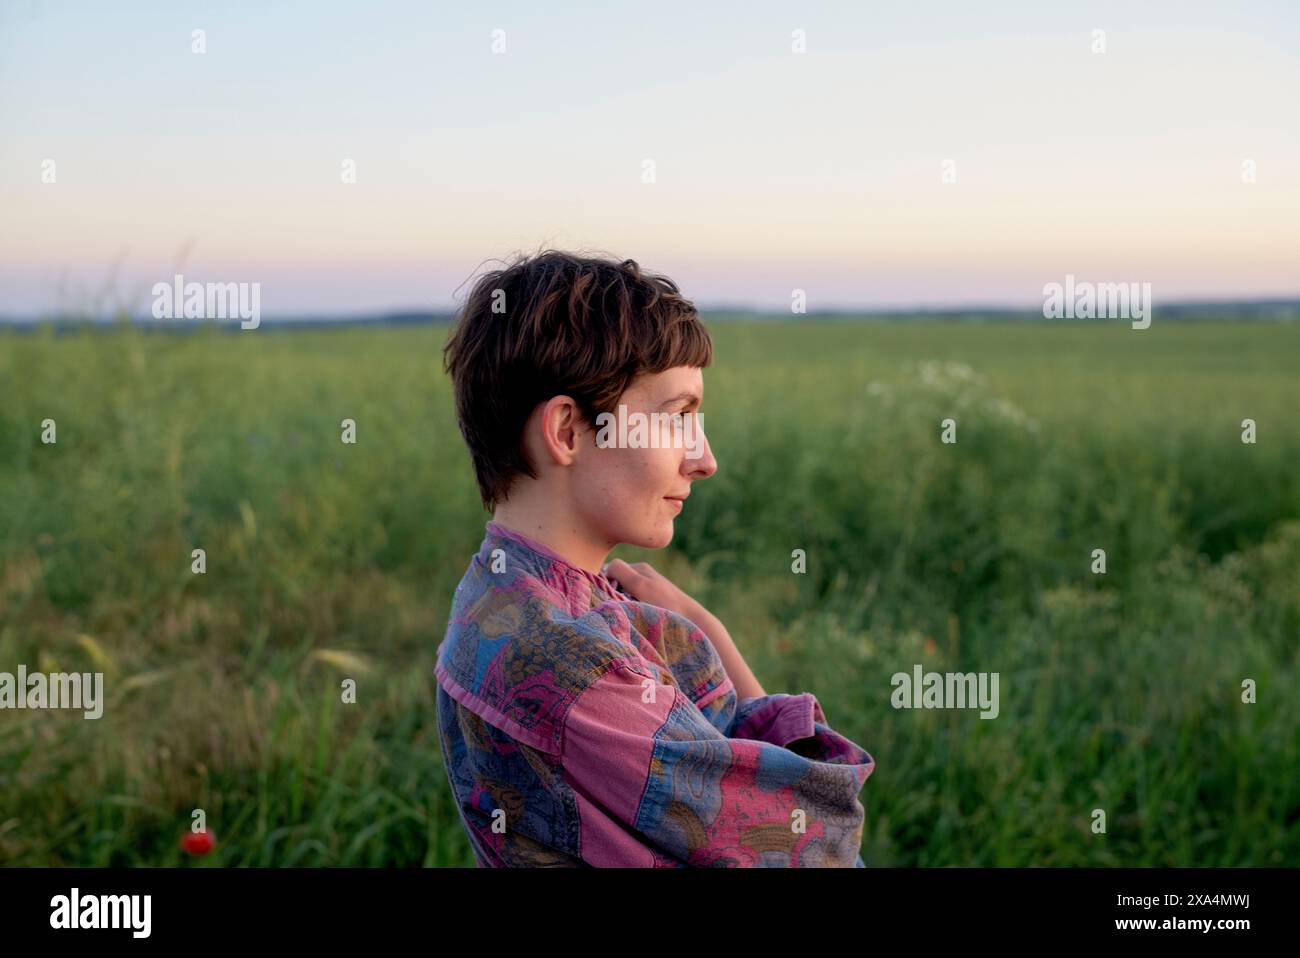 A young individual with short hair sits in a field at dusk, gazing into the distance with a serene expression. Stock Photo